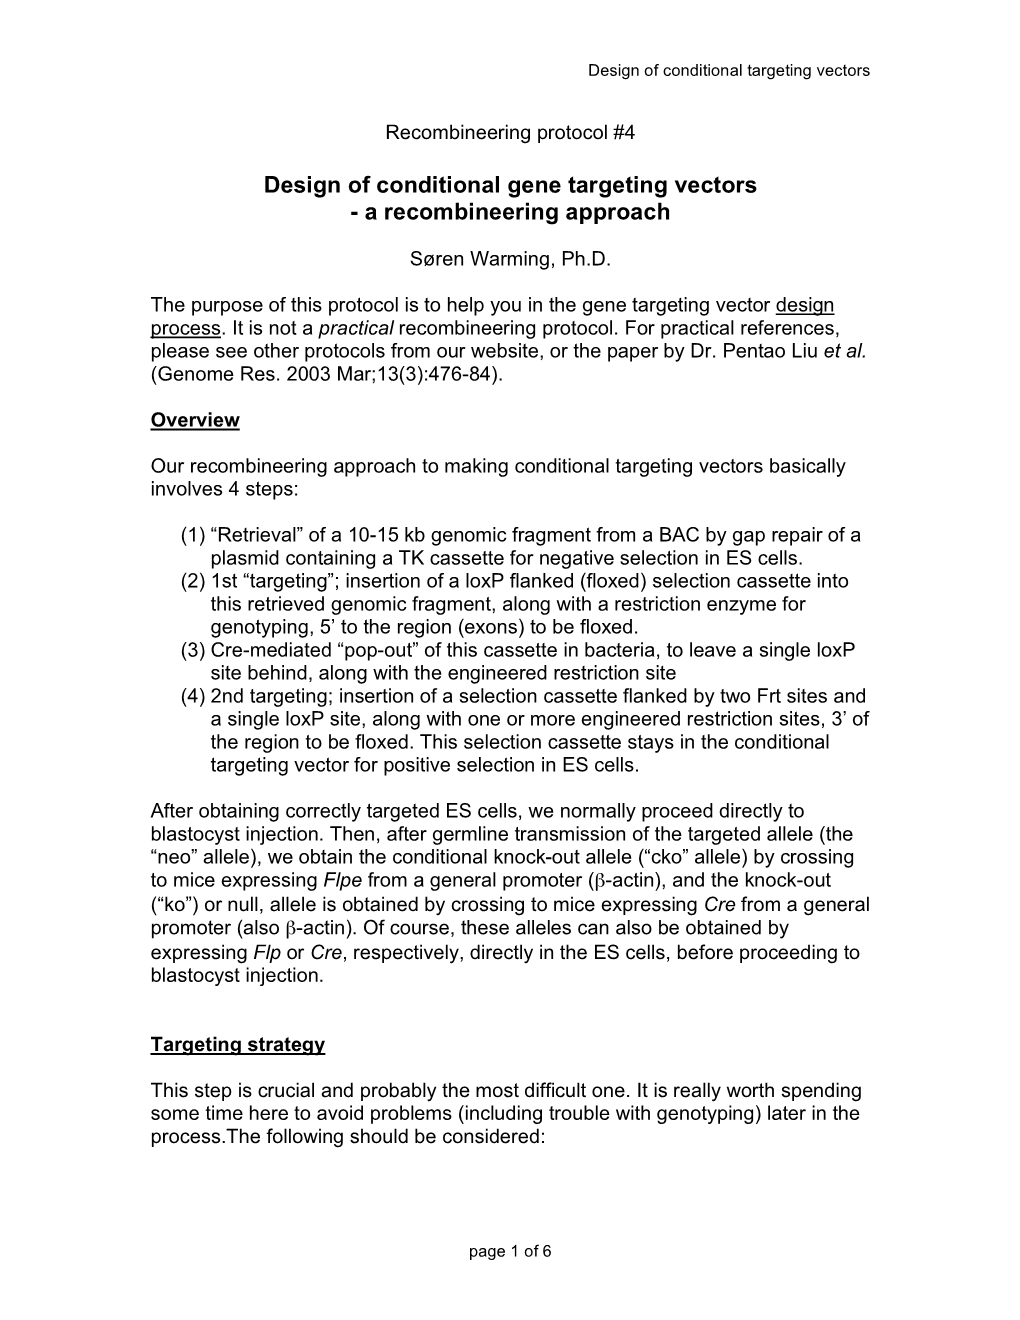 Design of Conditional Gene Targeting Vectors - a Recombineering Approach